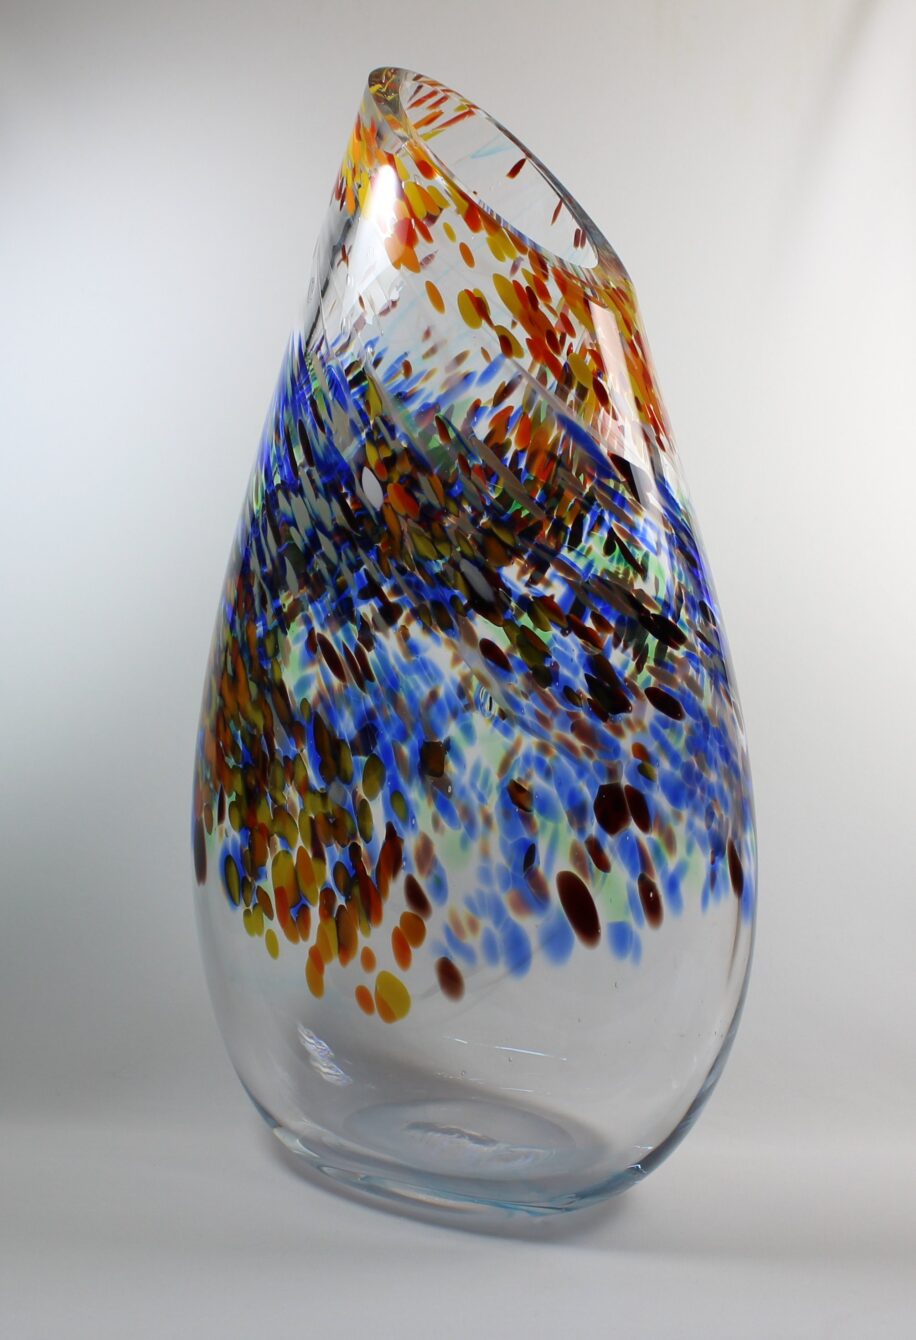 Tall Clear Mixed Frit Vase by Guy Hollington at The Avenue Gallery, a contemporary fine art gallery in Victoria, BC, Canada.